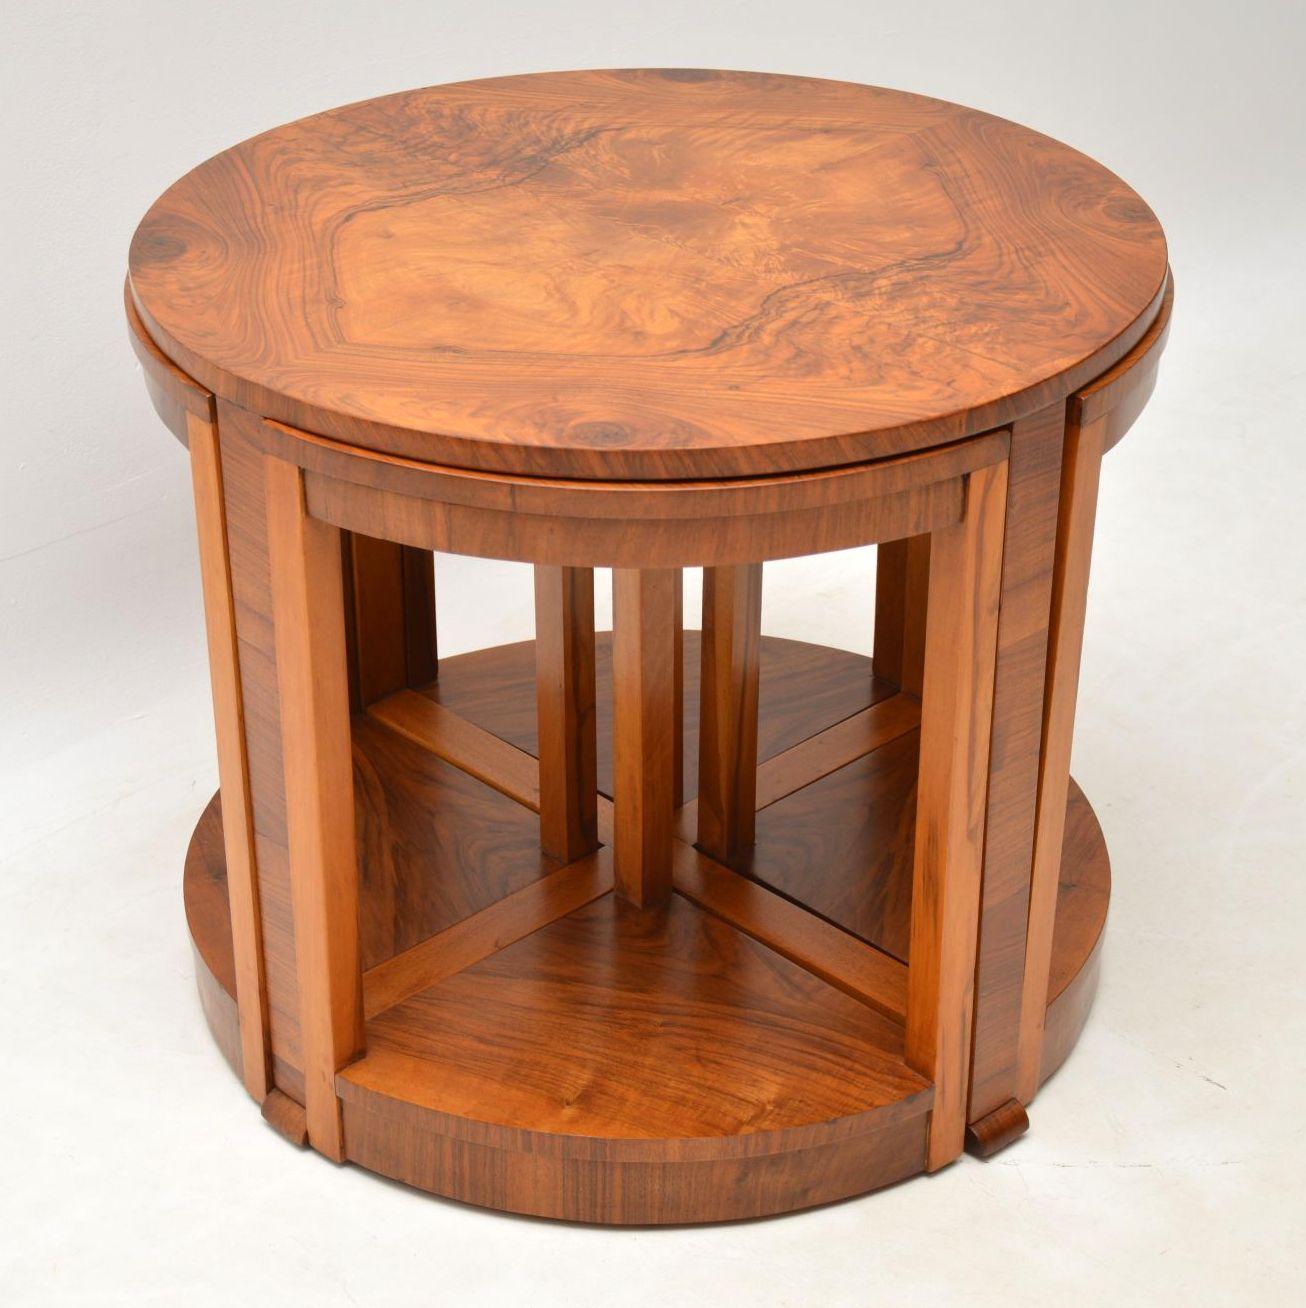 A beautifully made original Art Deco nesting coffee table, in stunning figured walnut. It dates from around the 1920s-1930s period. This consists of a larger circular coffee table, with four pie shaped smaller tables that nest beneath the top. We